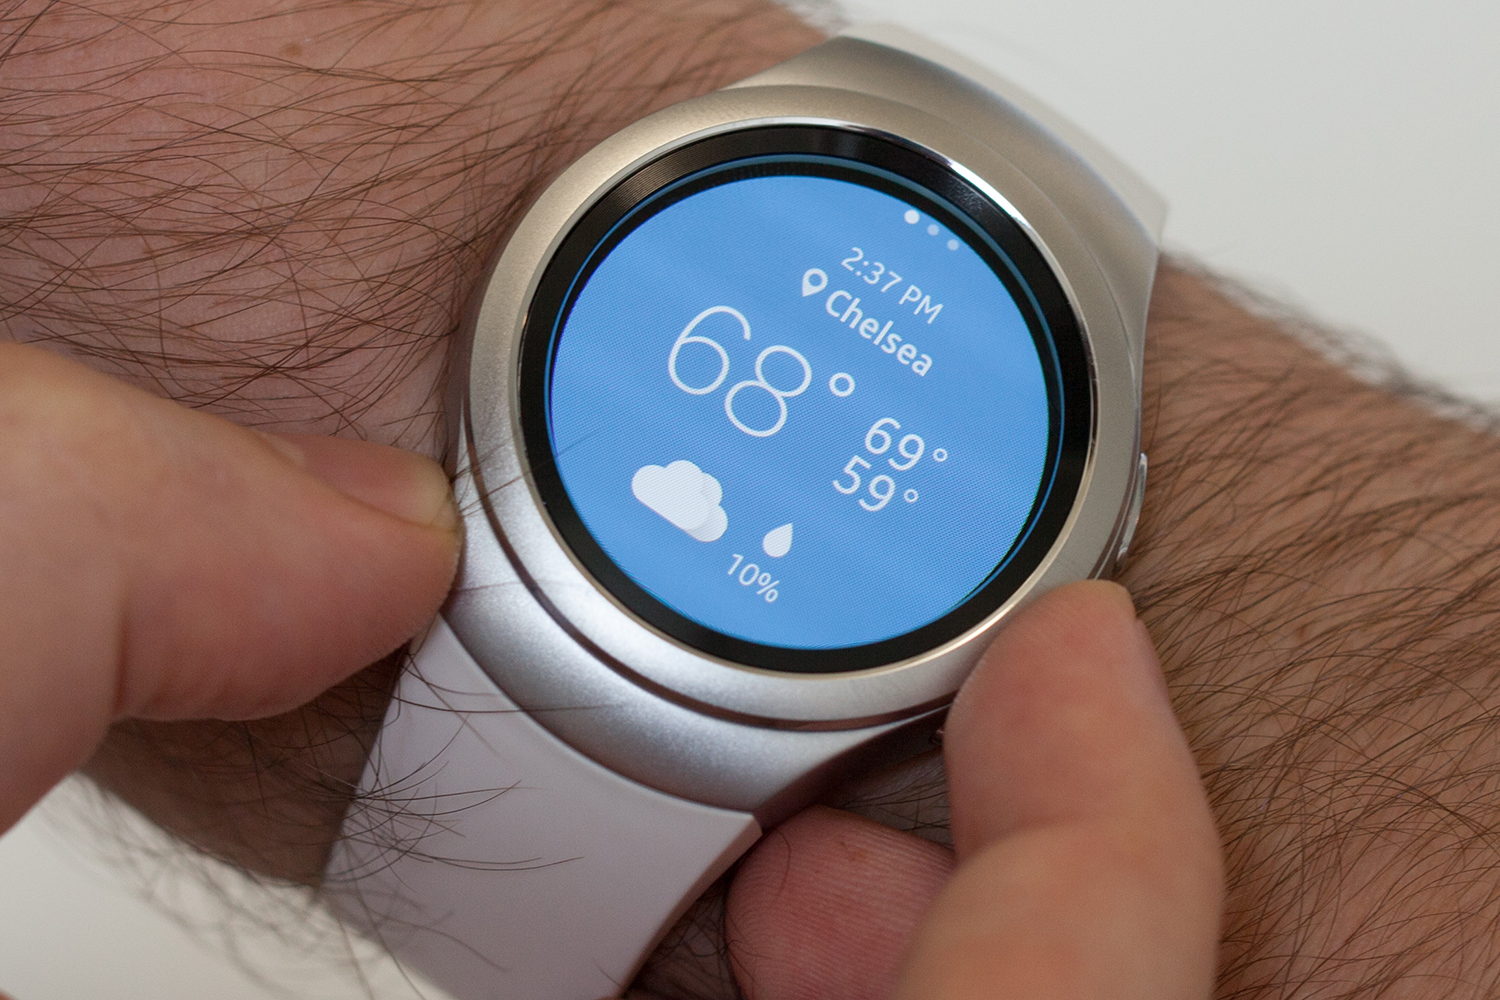 Samsung Gear S2 | Full Review, Specs, Price, and More | Digital Trends